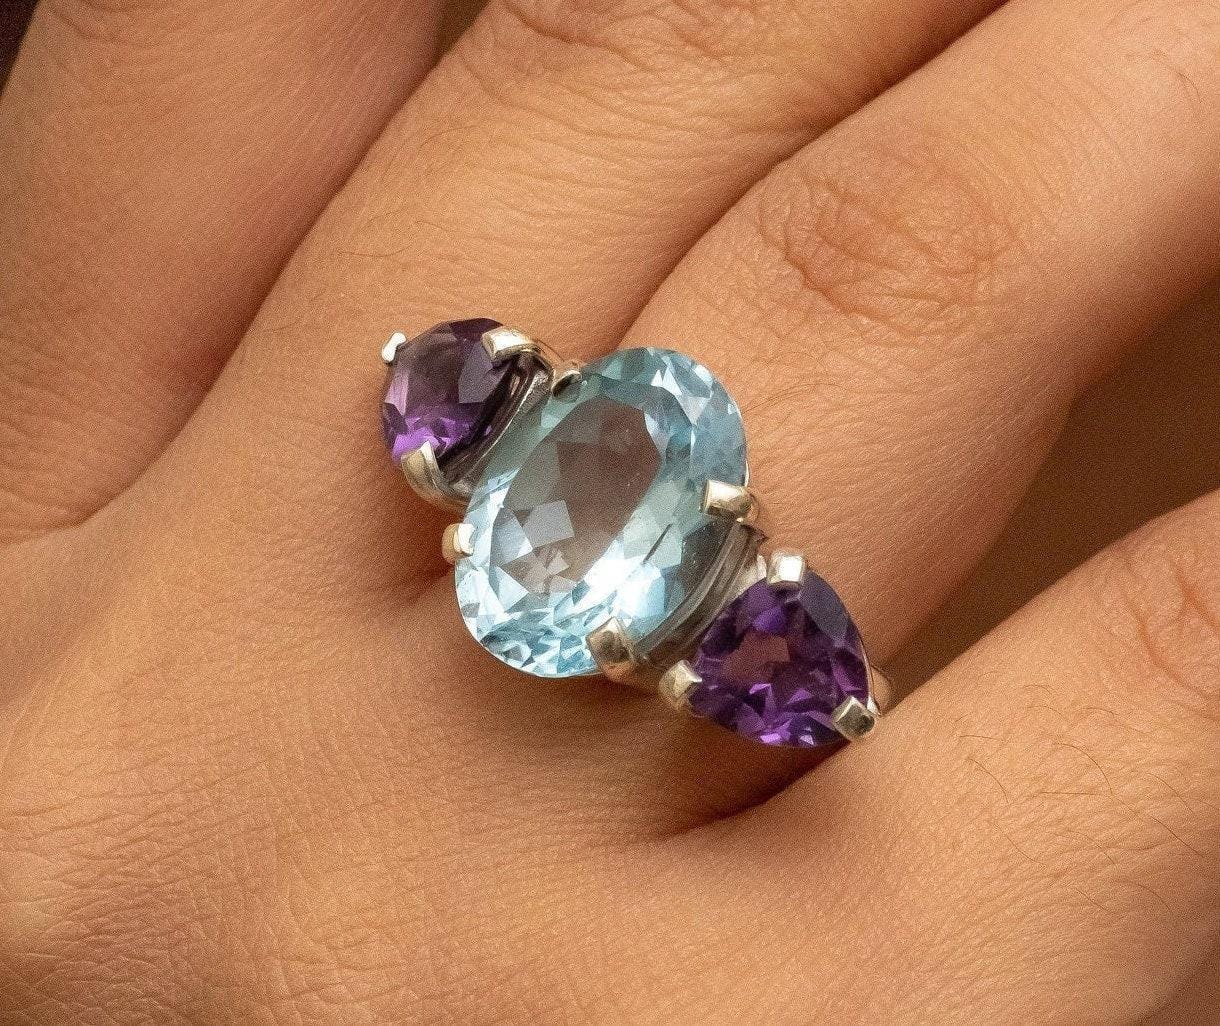 Blue Topaz & Amethyst Ring Natural Gemstone 925 Solid Sterling Silver Handmade Designer Jewelry ( All Sizes Available ) - Silverhubjewels